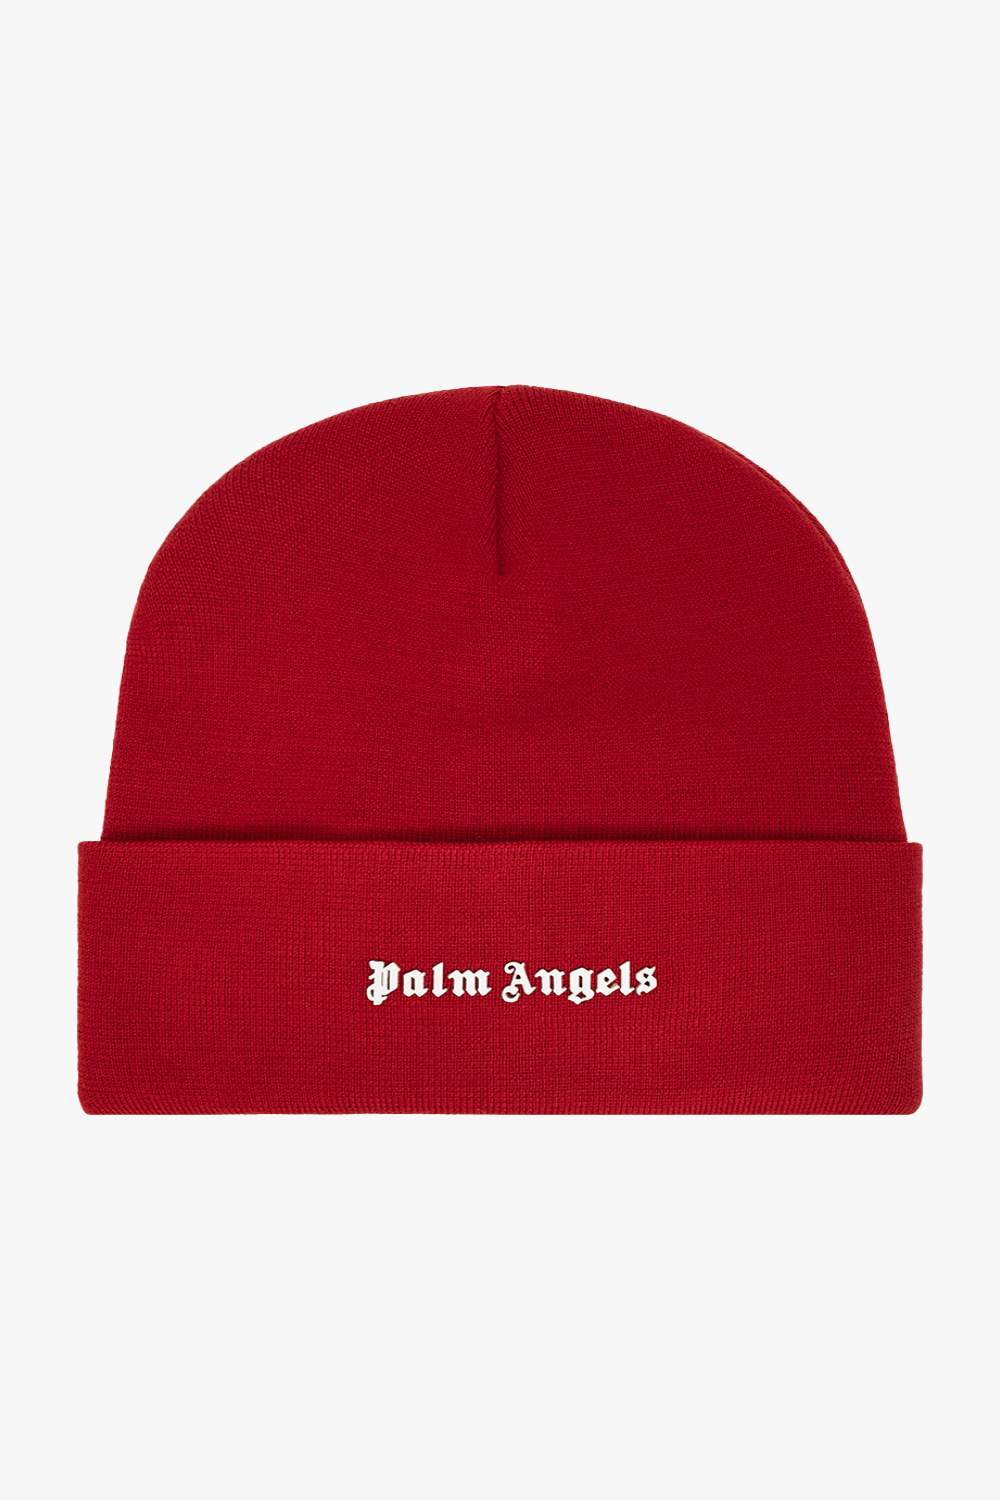 GenesinlifeShops Sweden - Red Beanie with logo Palm Angels